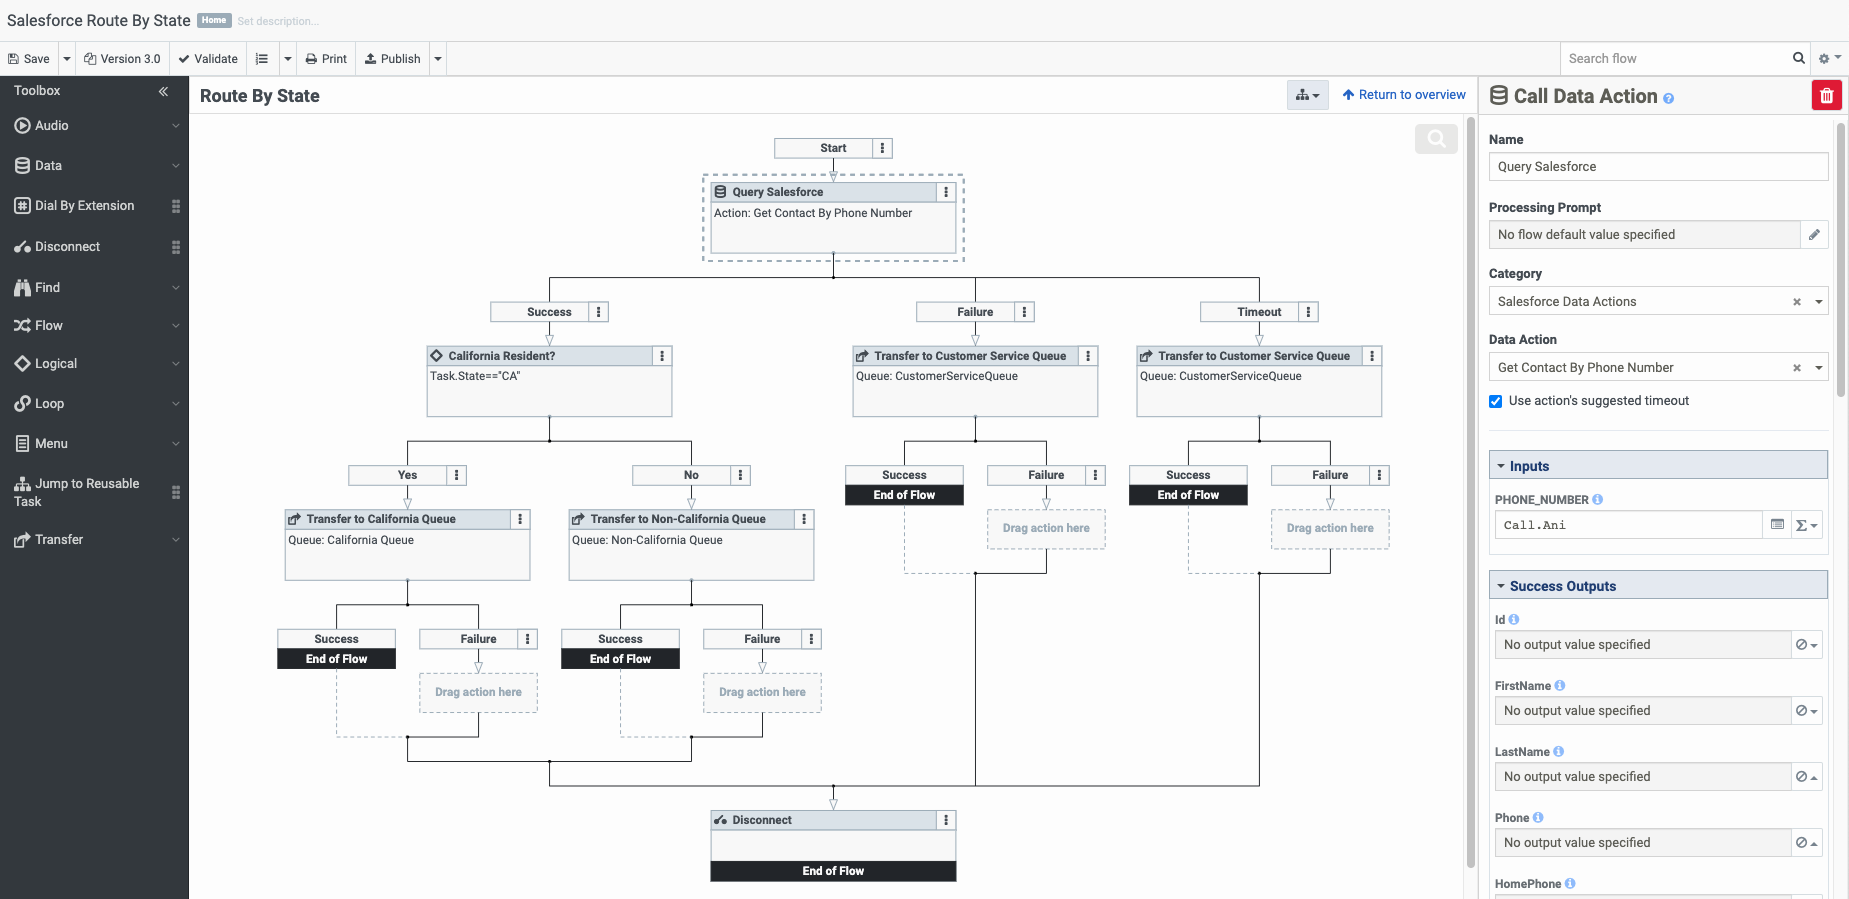 Example call flow for Salesforce data actions integration